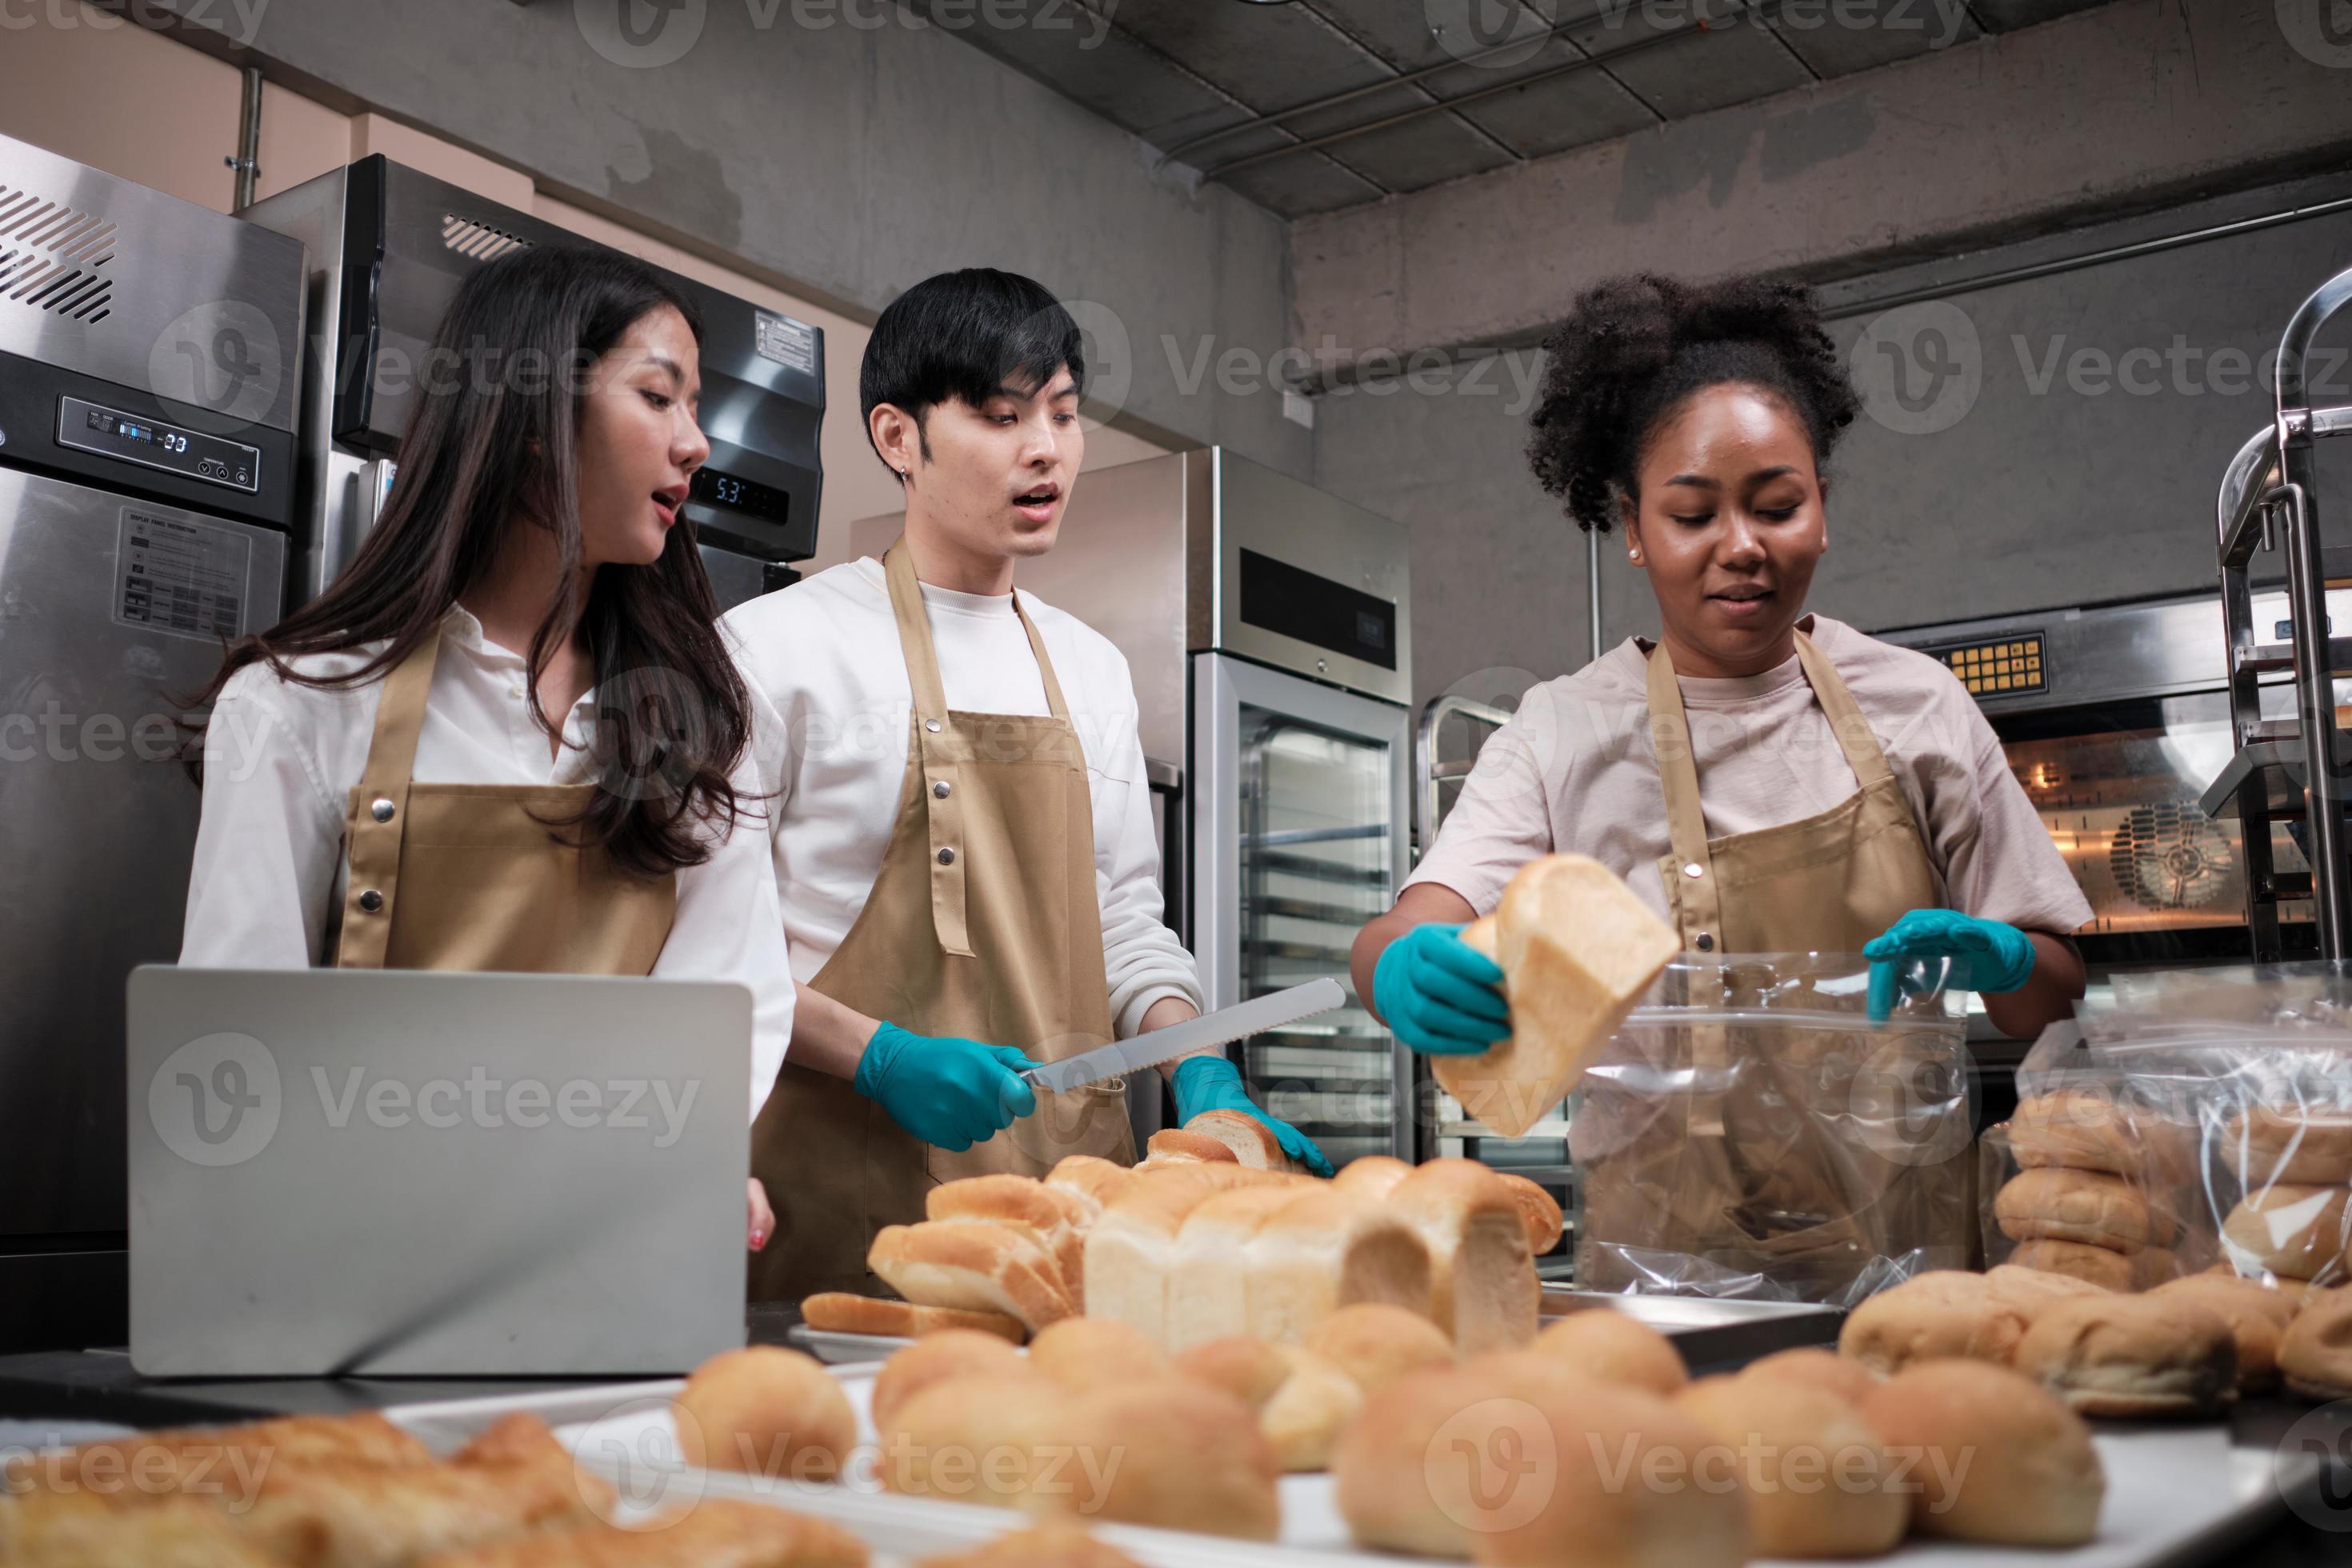 https://static.vecteezy.com/system/resources/previews/007/902/543/large_2x/three-young-friends-and-startup-partners-of-bread-dough-and-pastry-foods-busy-with-homemade-baking-jobs-while-cooking-orders-online-packing-and-delivering-on-bakery-shop-small-business-entrepreneur-photo.jpg